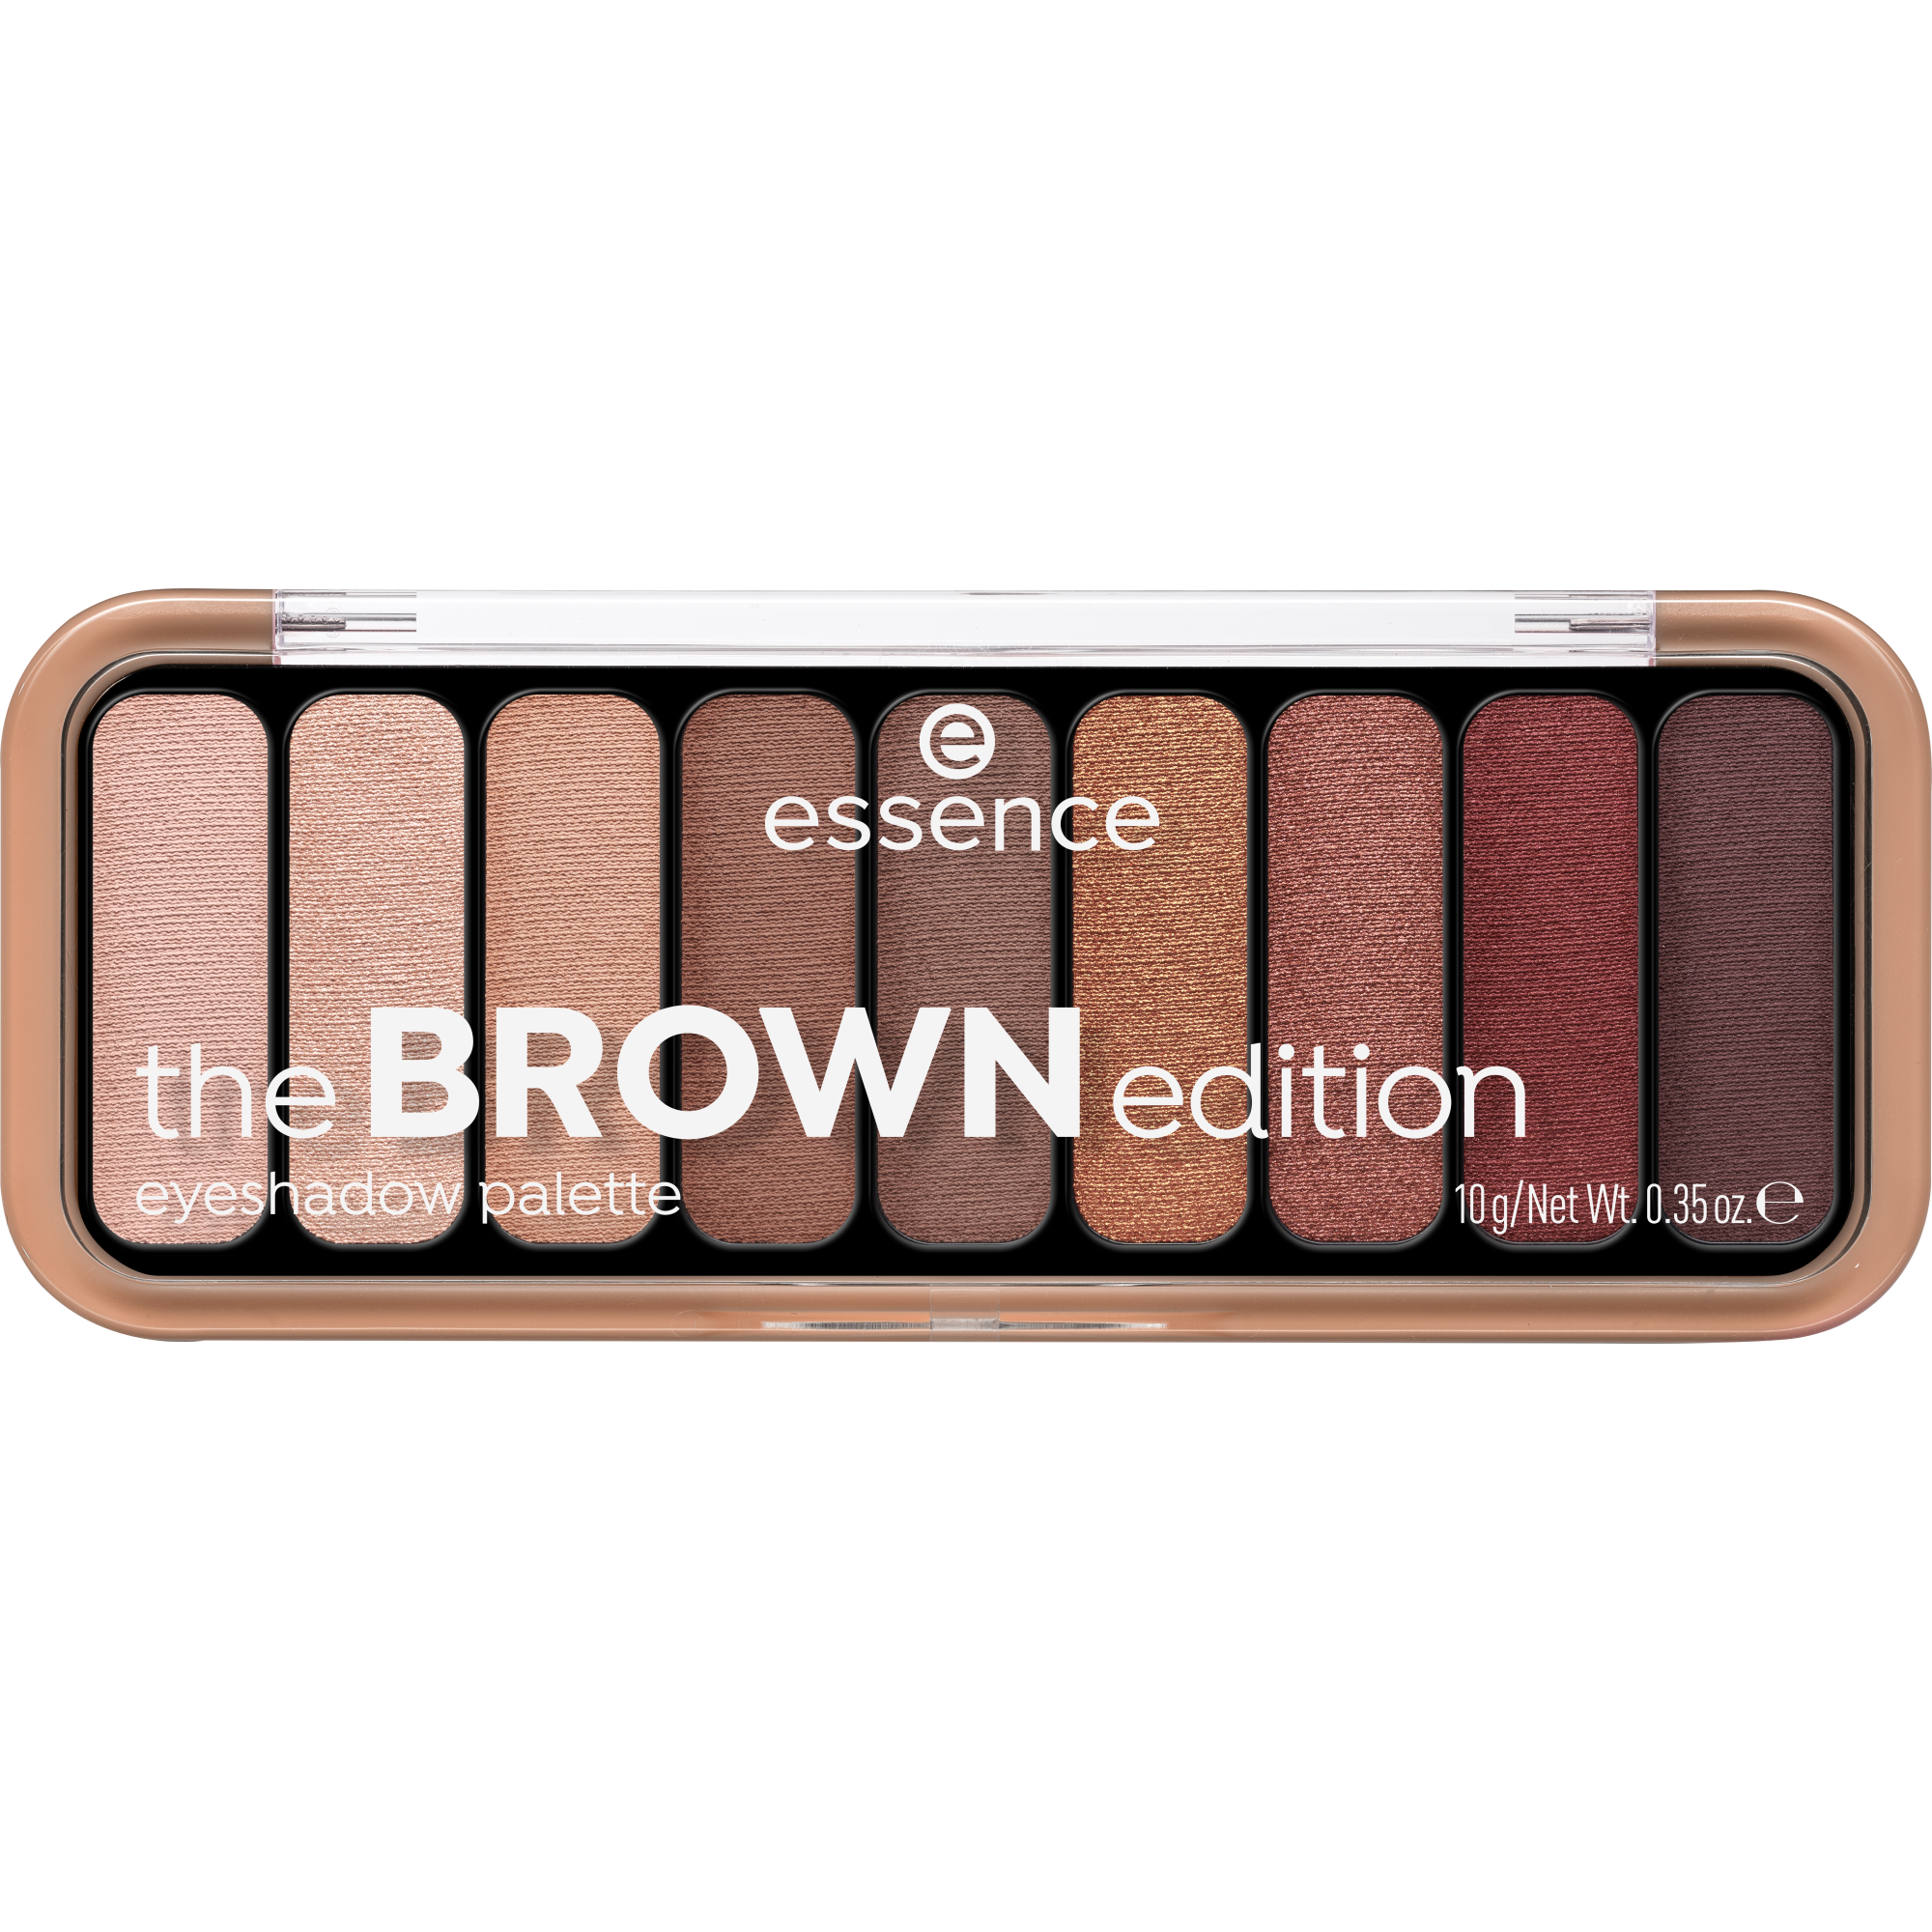 the BROWN edition eyeshadow palette